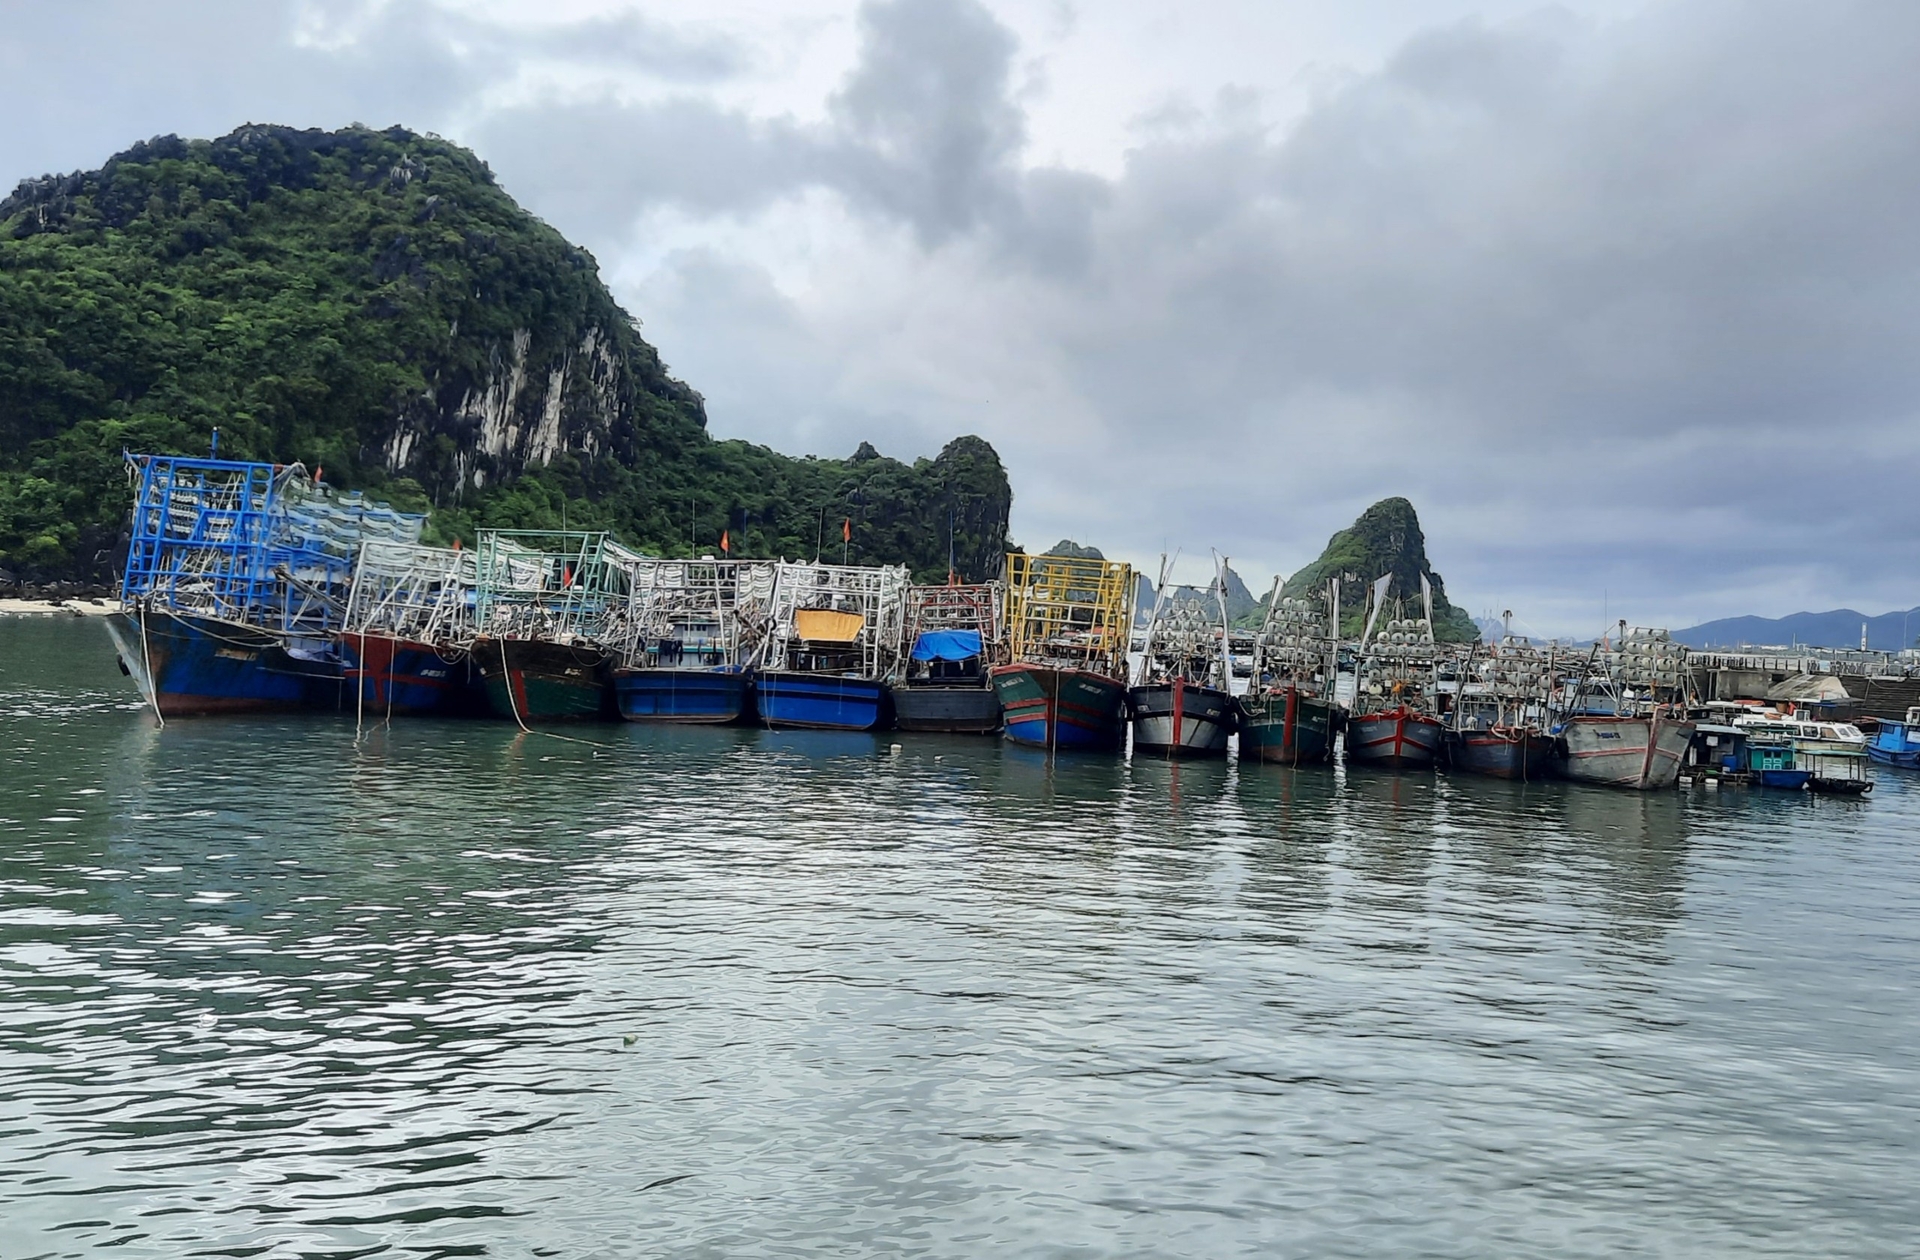 Quang Ninh province needs to tighten management of the fishing fleet. Photo: Nguyen Thanh.